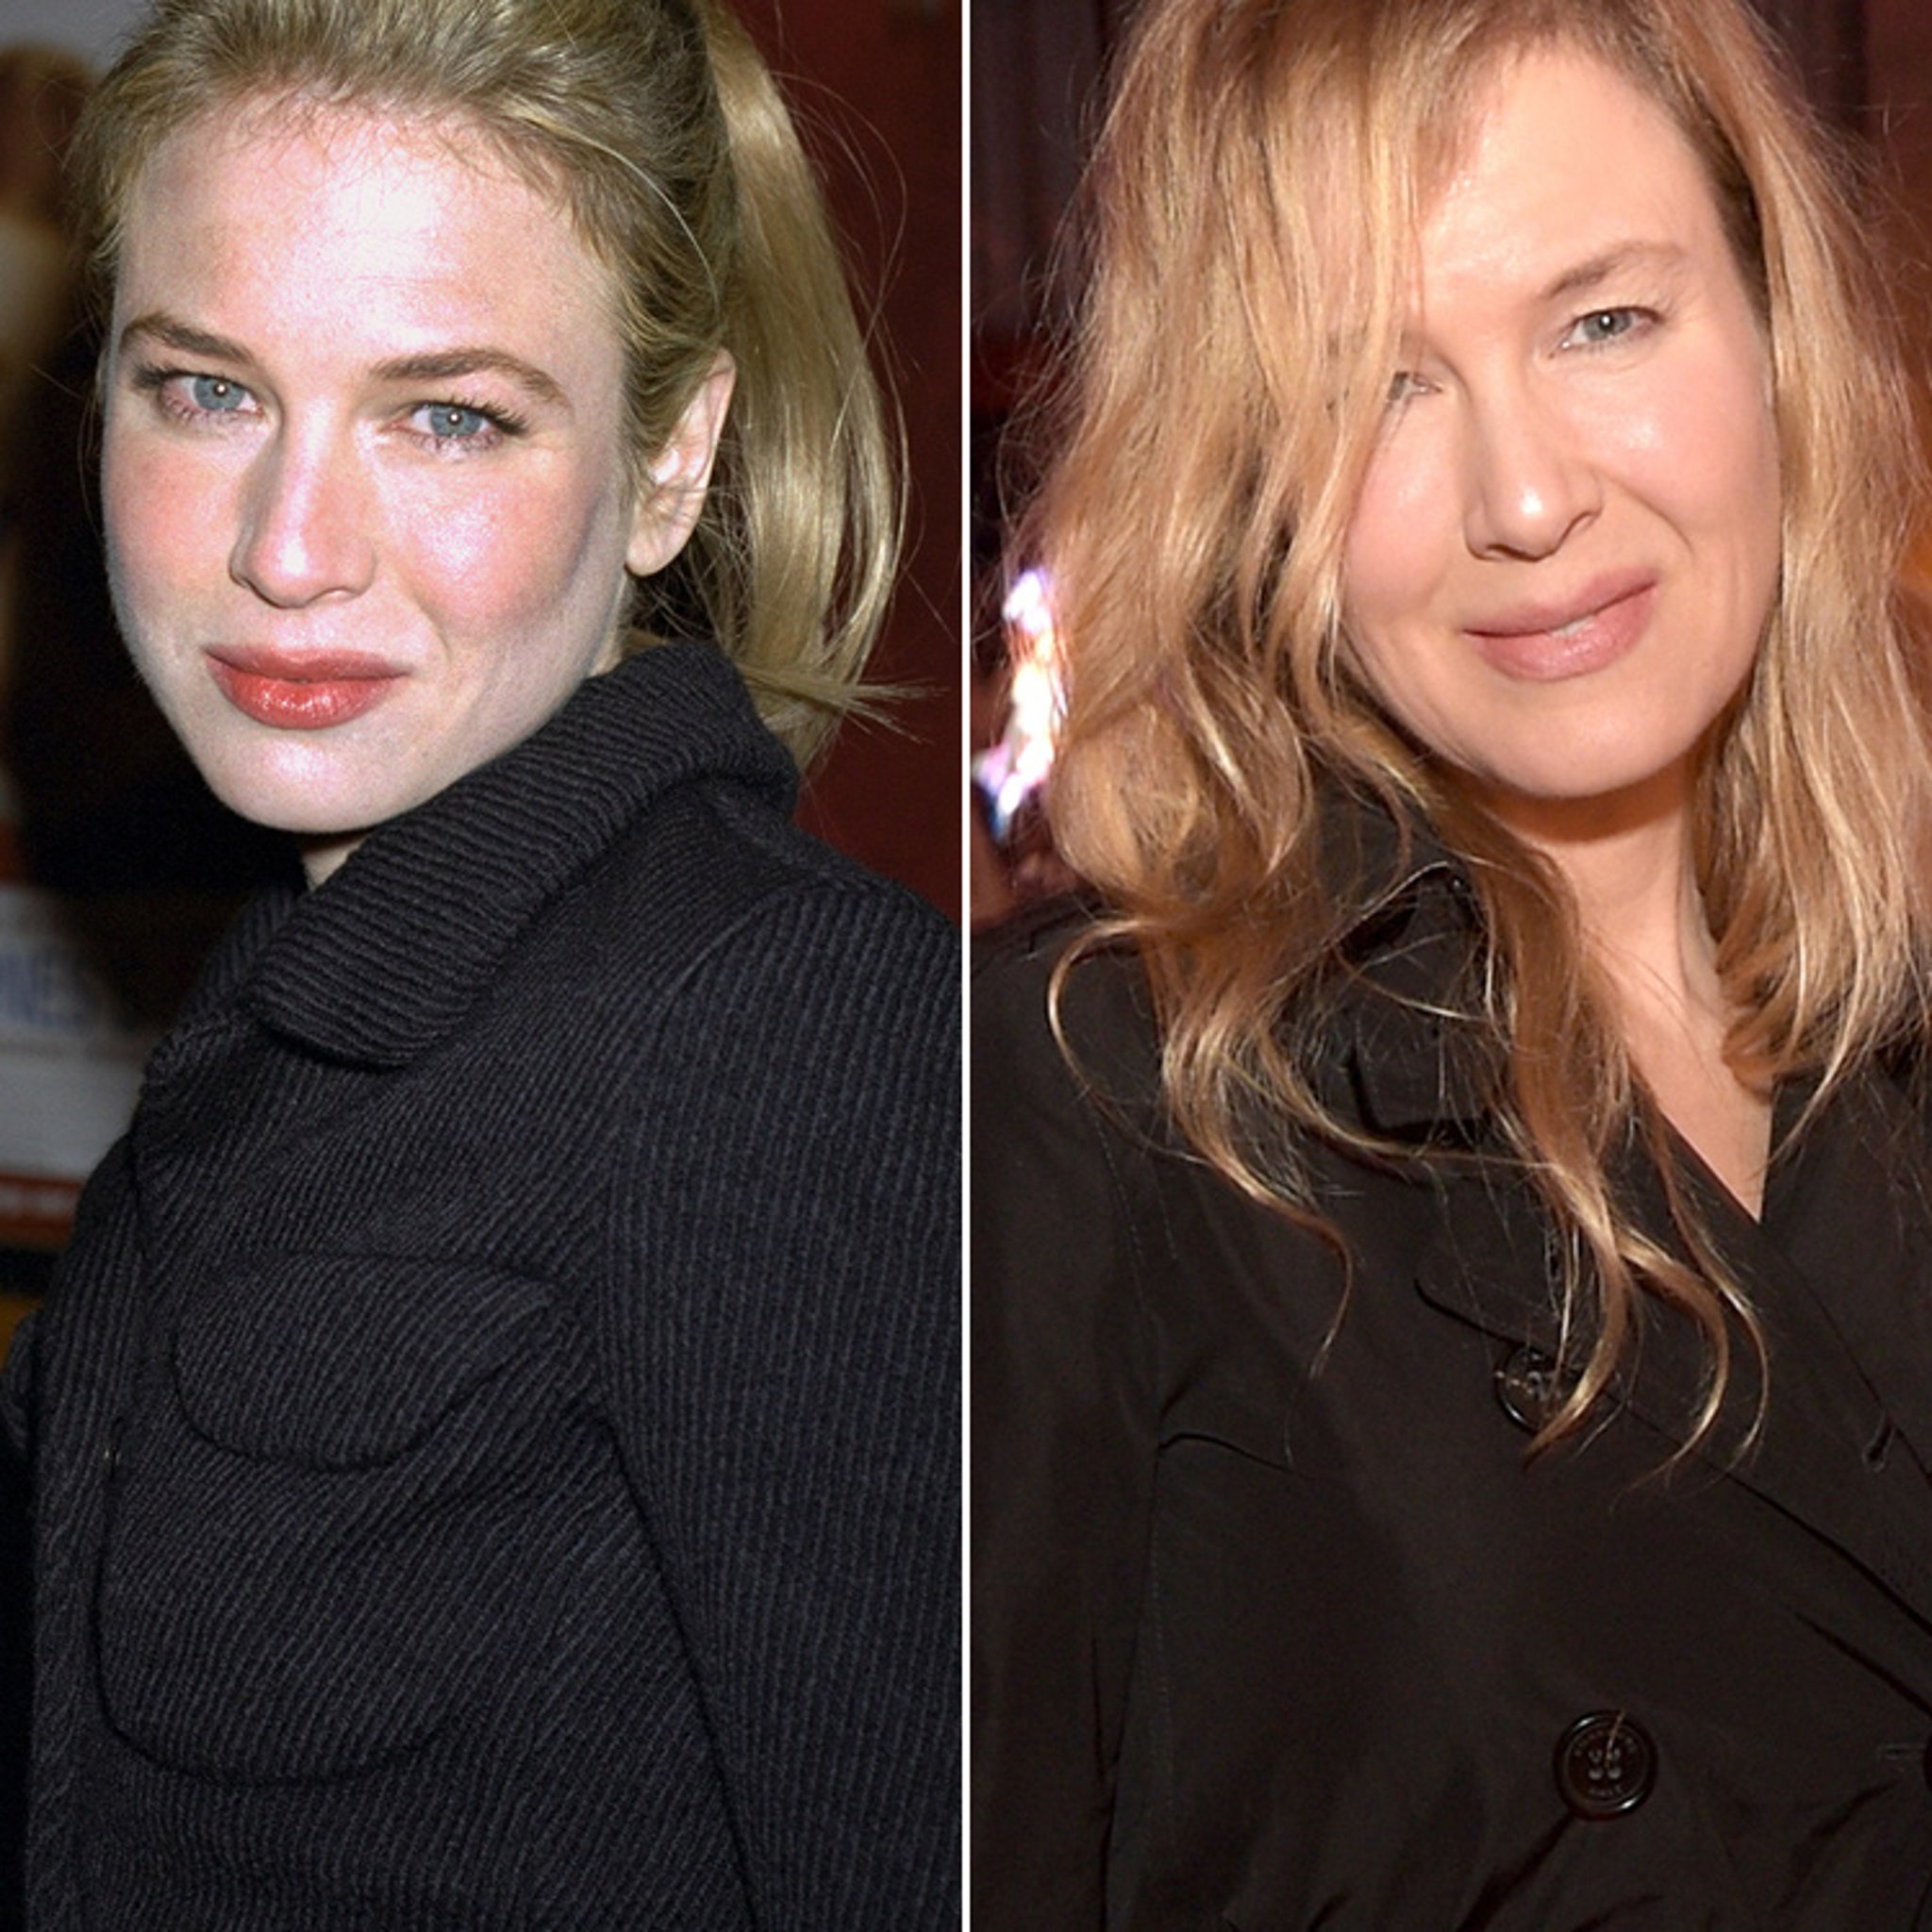 Renee Zellweger Has Time for Talk About Her Appearance -- Not Really Part of My Life"